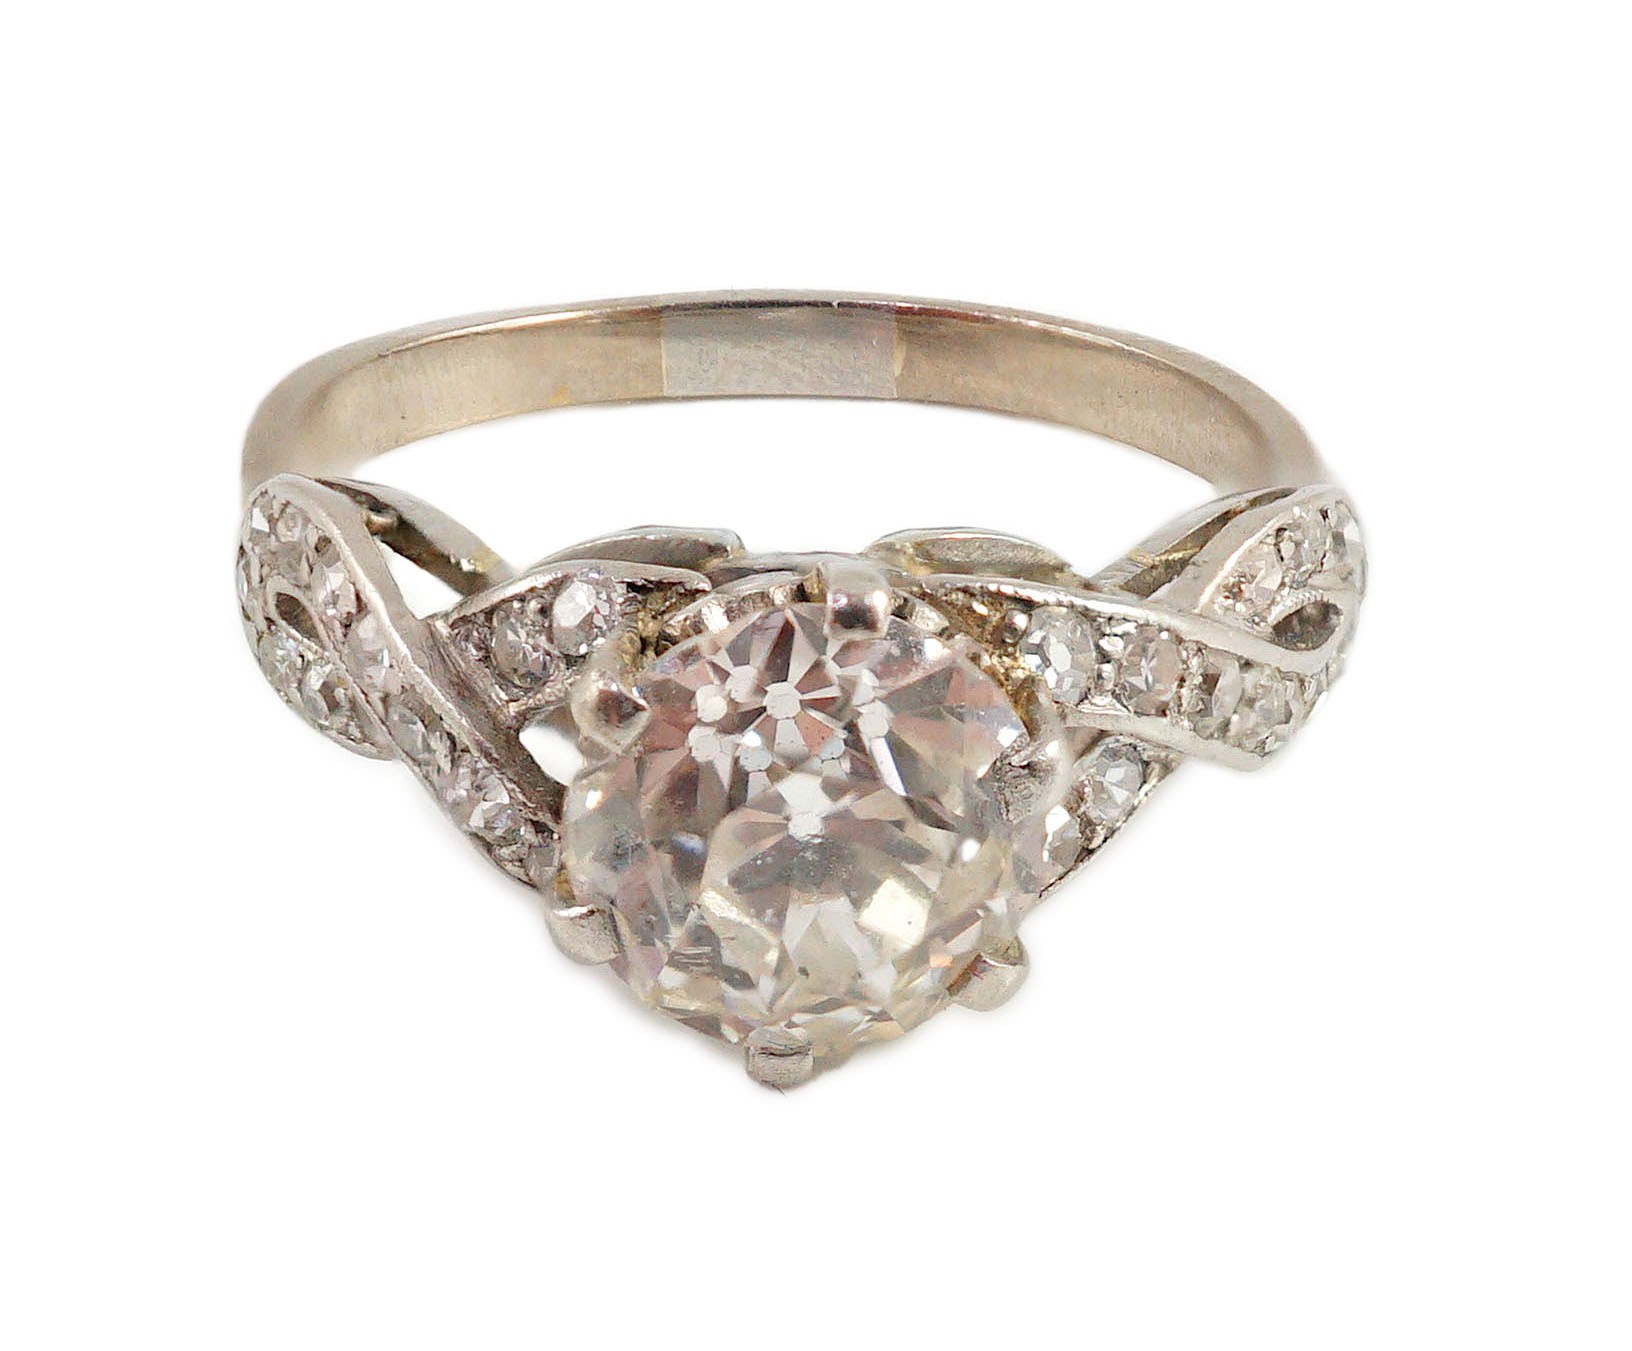 A mid 20th century white gold and single stone diamond ring, with diamond set crossover shoulders